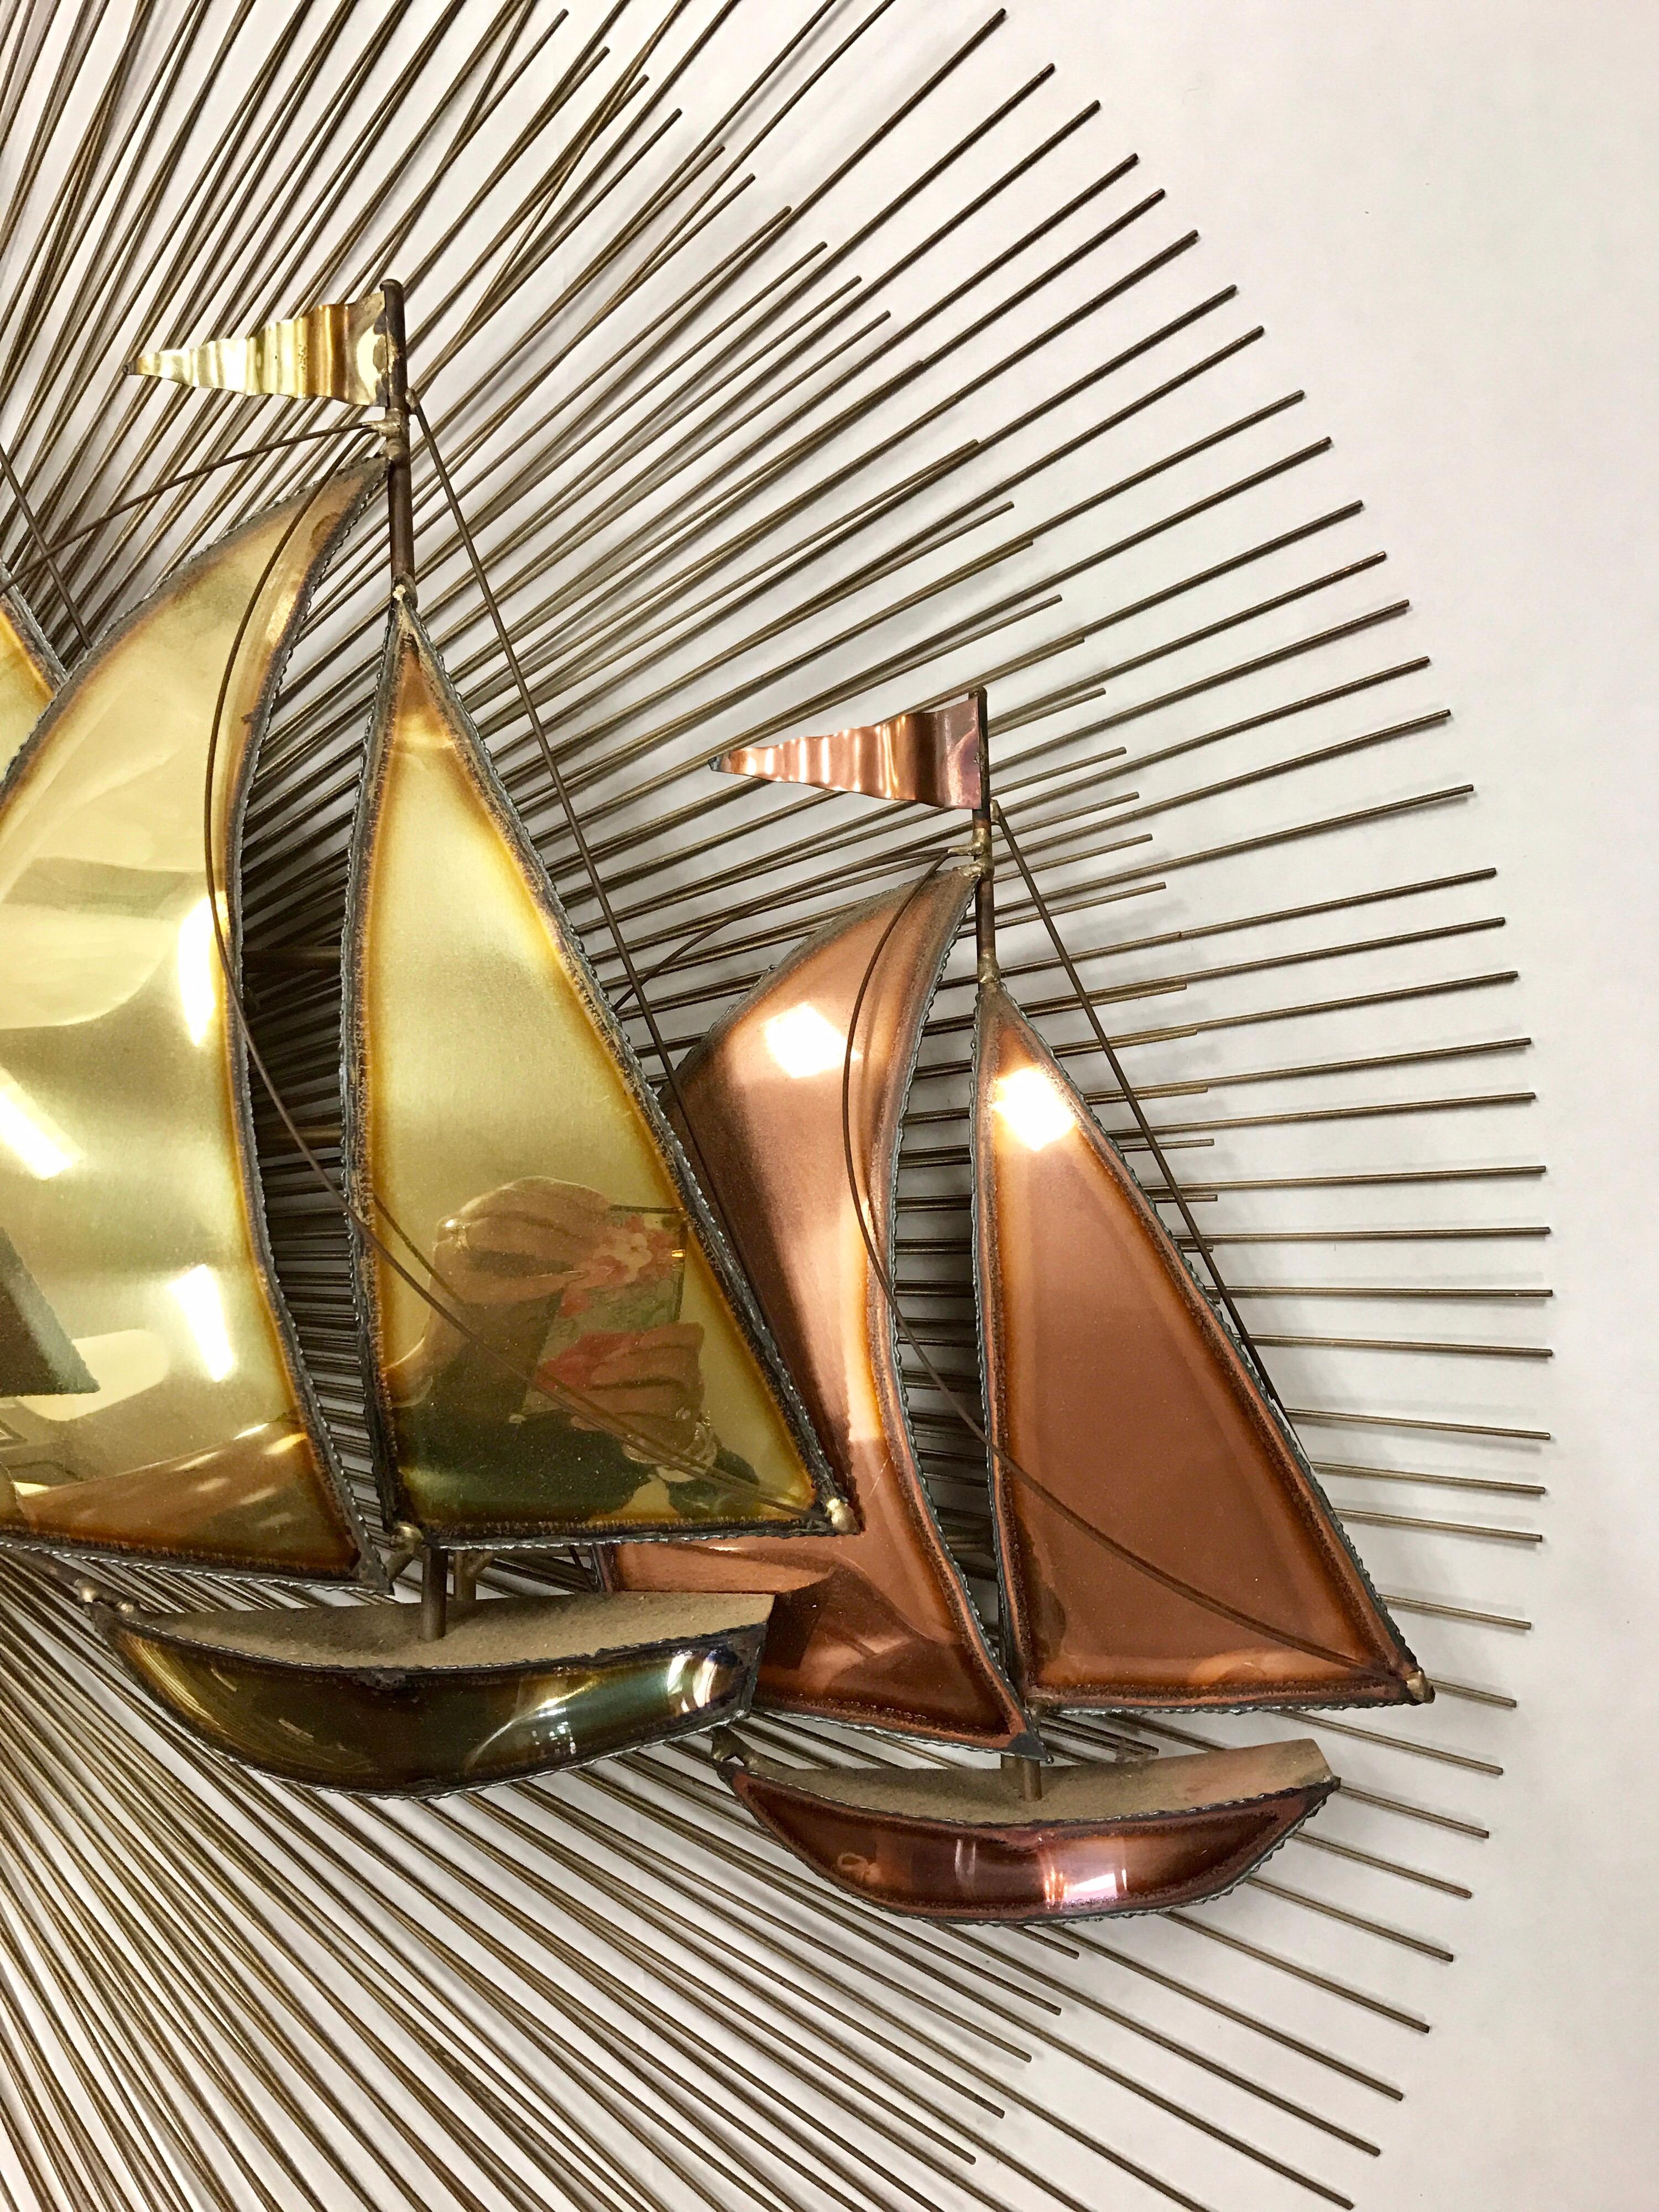 Mid century sunburst has two layers of brass spindles with alternating brass and copper sailboats. In the style of Curtis Jere.